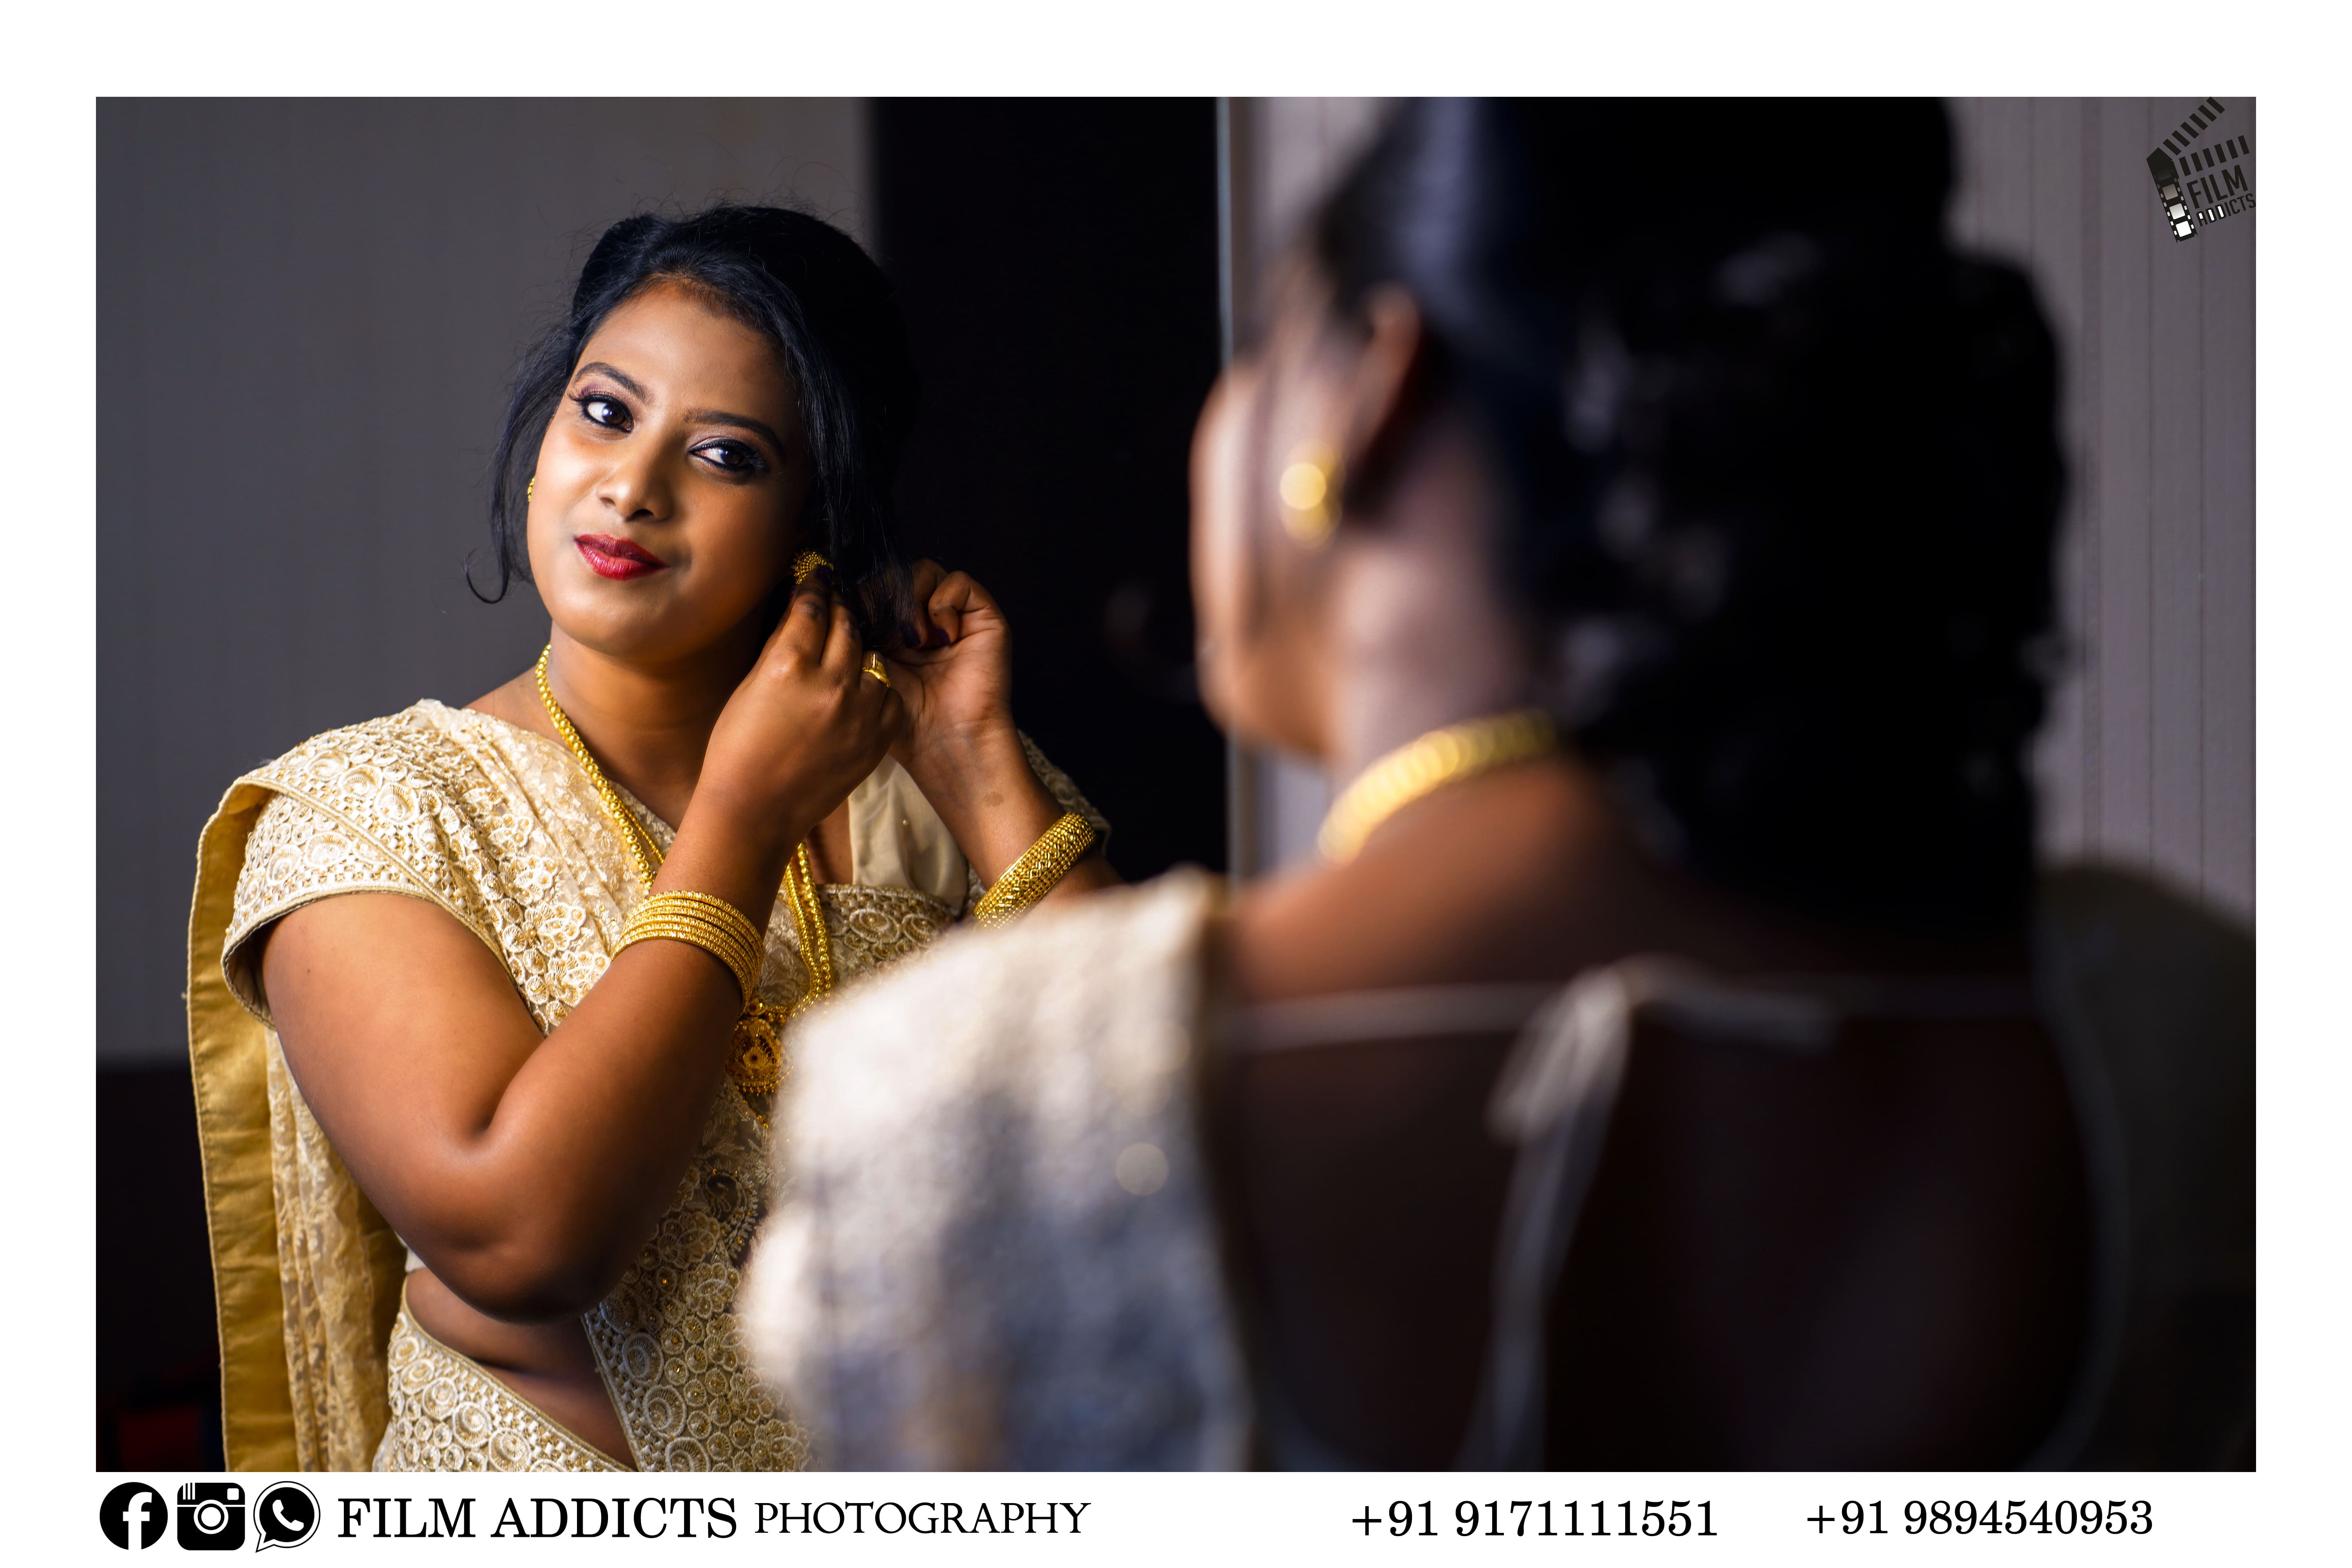 Best Christian Wedding Photography in Dindigul,best Christian Wedding photographers in Dindigul,best Christian Wedding photography in Dindigul,best candid photographers in Dindigul,best candid photography in Dindigul,best marriage photographers in Dindigul,best marriage photography in Dindigul,best photographers in Dindigul,best photography in Dindigul,best Christian Wedding candid photography in Dindigul,best Christian Wedding candid photographers in Dindigul,best Christian Wedding video in Dindigul,best Christian Wedding videographers in Dindigul,best Christian Wedding videography in Dindigul,best candid videographers in Dindigul,best candid videography in Dindigul,best marriage videographers in Dindigul,best marriage videography in Dindigul,best videographers in Dindigul,best videography in Dindigul,best Christian Wedding candid videography in Dindigul,best Christian Wedding candid videographers in Dindigul,best helicam operators in Dindigul,best drone operators in Dindigul,best Christian Wedding studio in Dindigul,best professional photographers in Dindigul,best professional photography in Dindigul,No.1 Christian Wedding photographers in Dindigul,No.1 Christian Wedding photography in Dindigul,Dindigul Christian Wedding photographers,Dindigul Christian Wedding photography,Dindigul Christian Wedding videos,best candid videos in Dindigul,best candid photos in Dindigul,best helicam operators photography in Dindigul,best helicam operator photographers in Dindigul,best outdoor videography in Dindigul,best professional Christian Wedding photography in Dindigul,best outdoor photography in Dindigul,best outdoor photographers in Dindigul,best drone operators photographers in Dindigul,best Christian Wedding candid videography in Dindigul, tamilnadu Christian Wedding photography, tamilnadu.